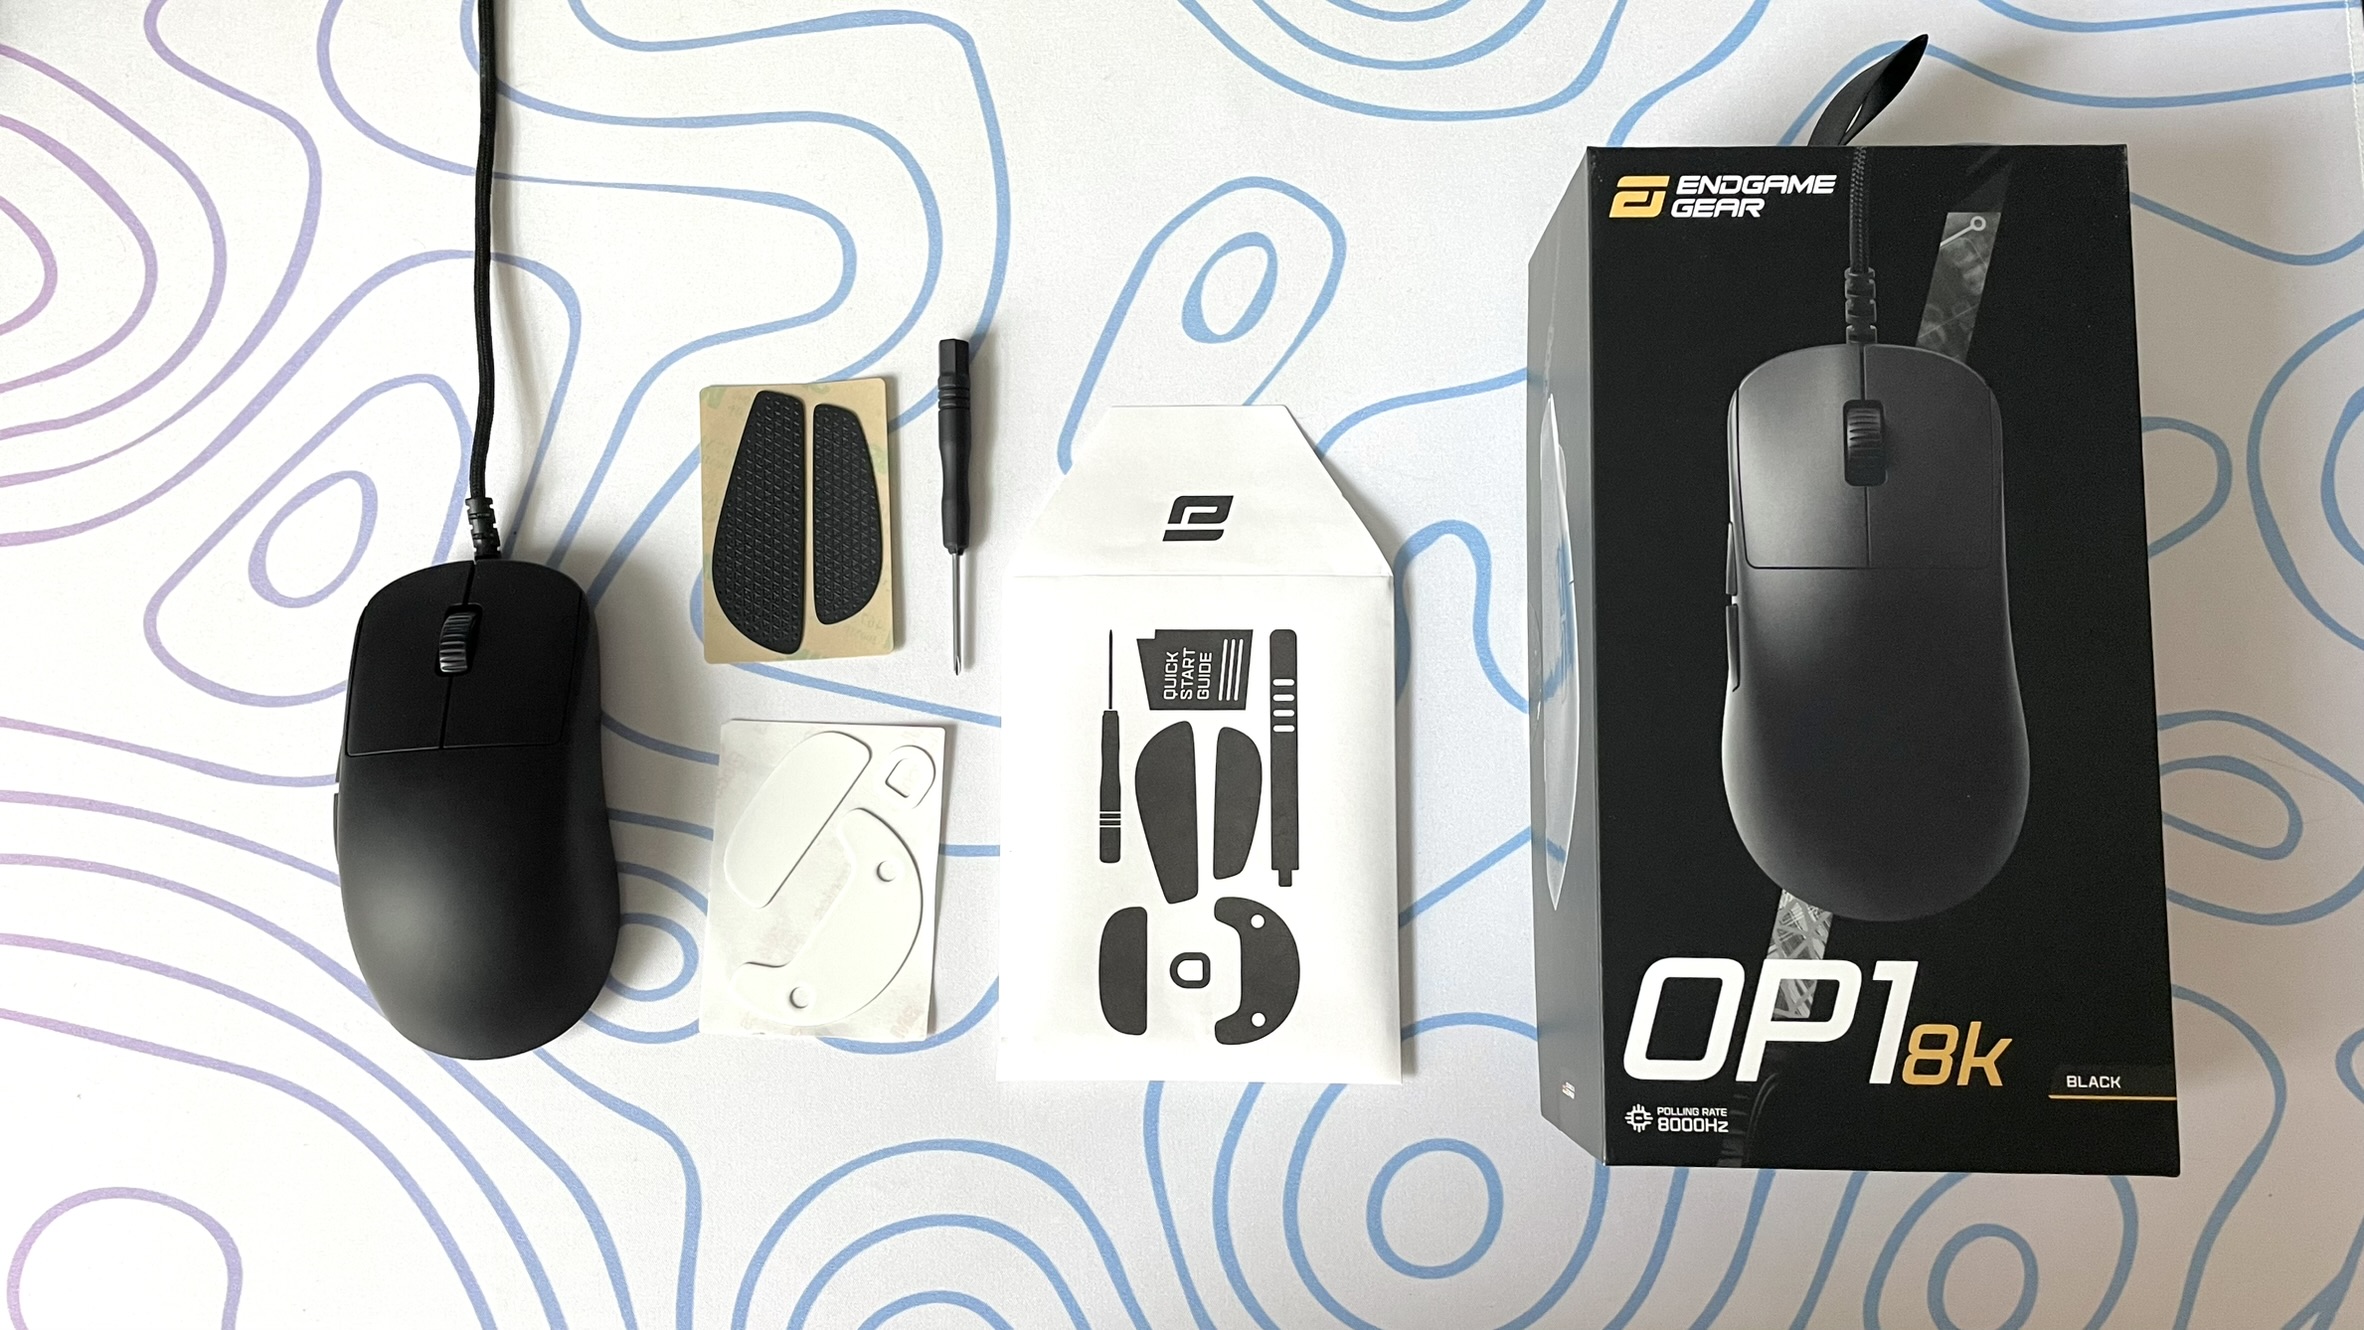 The Endgame Gear OP1 8k gaming mouse unboxed